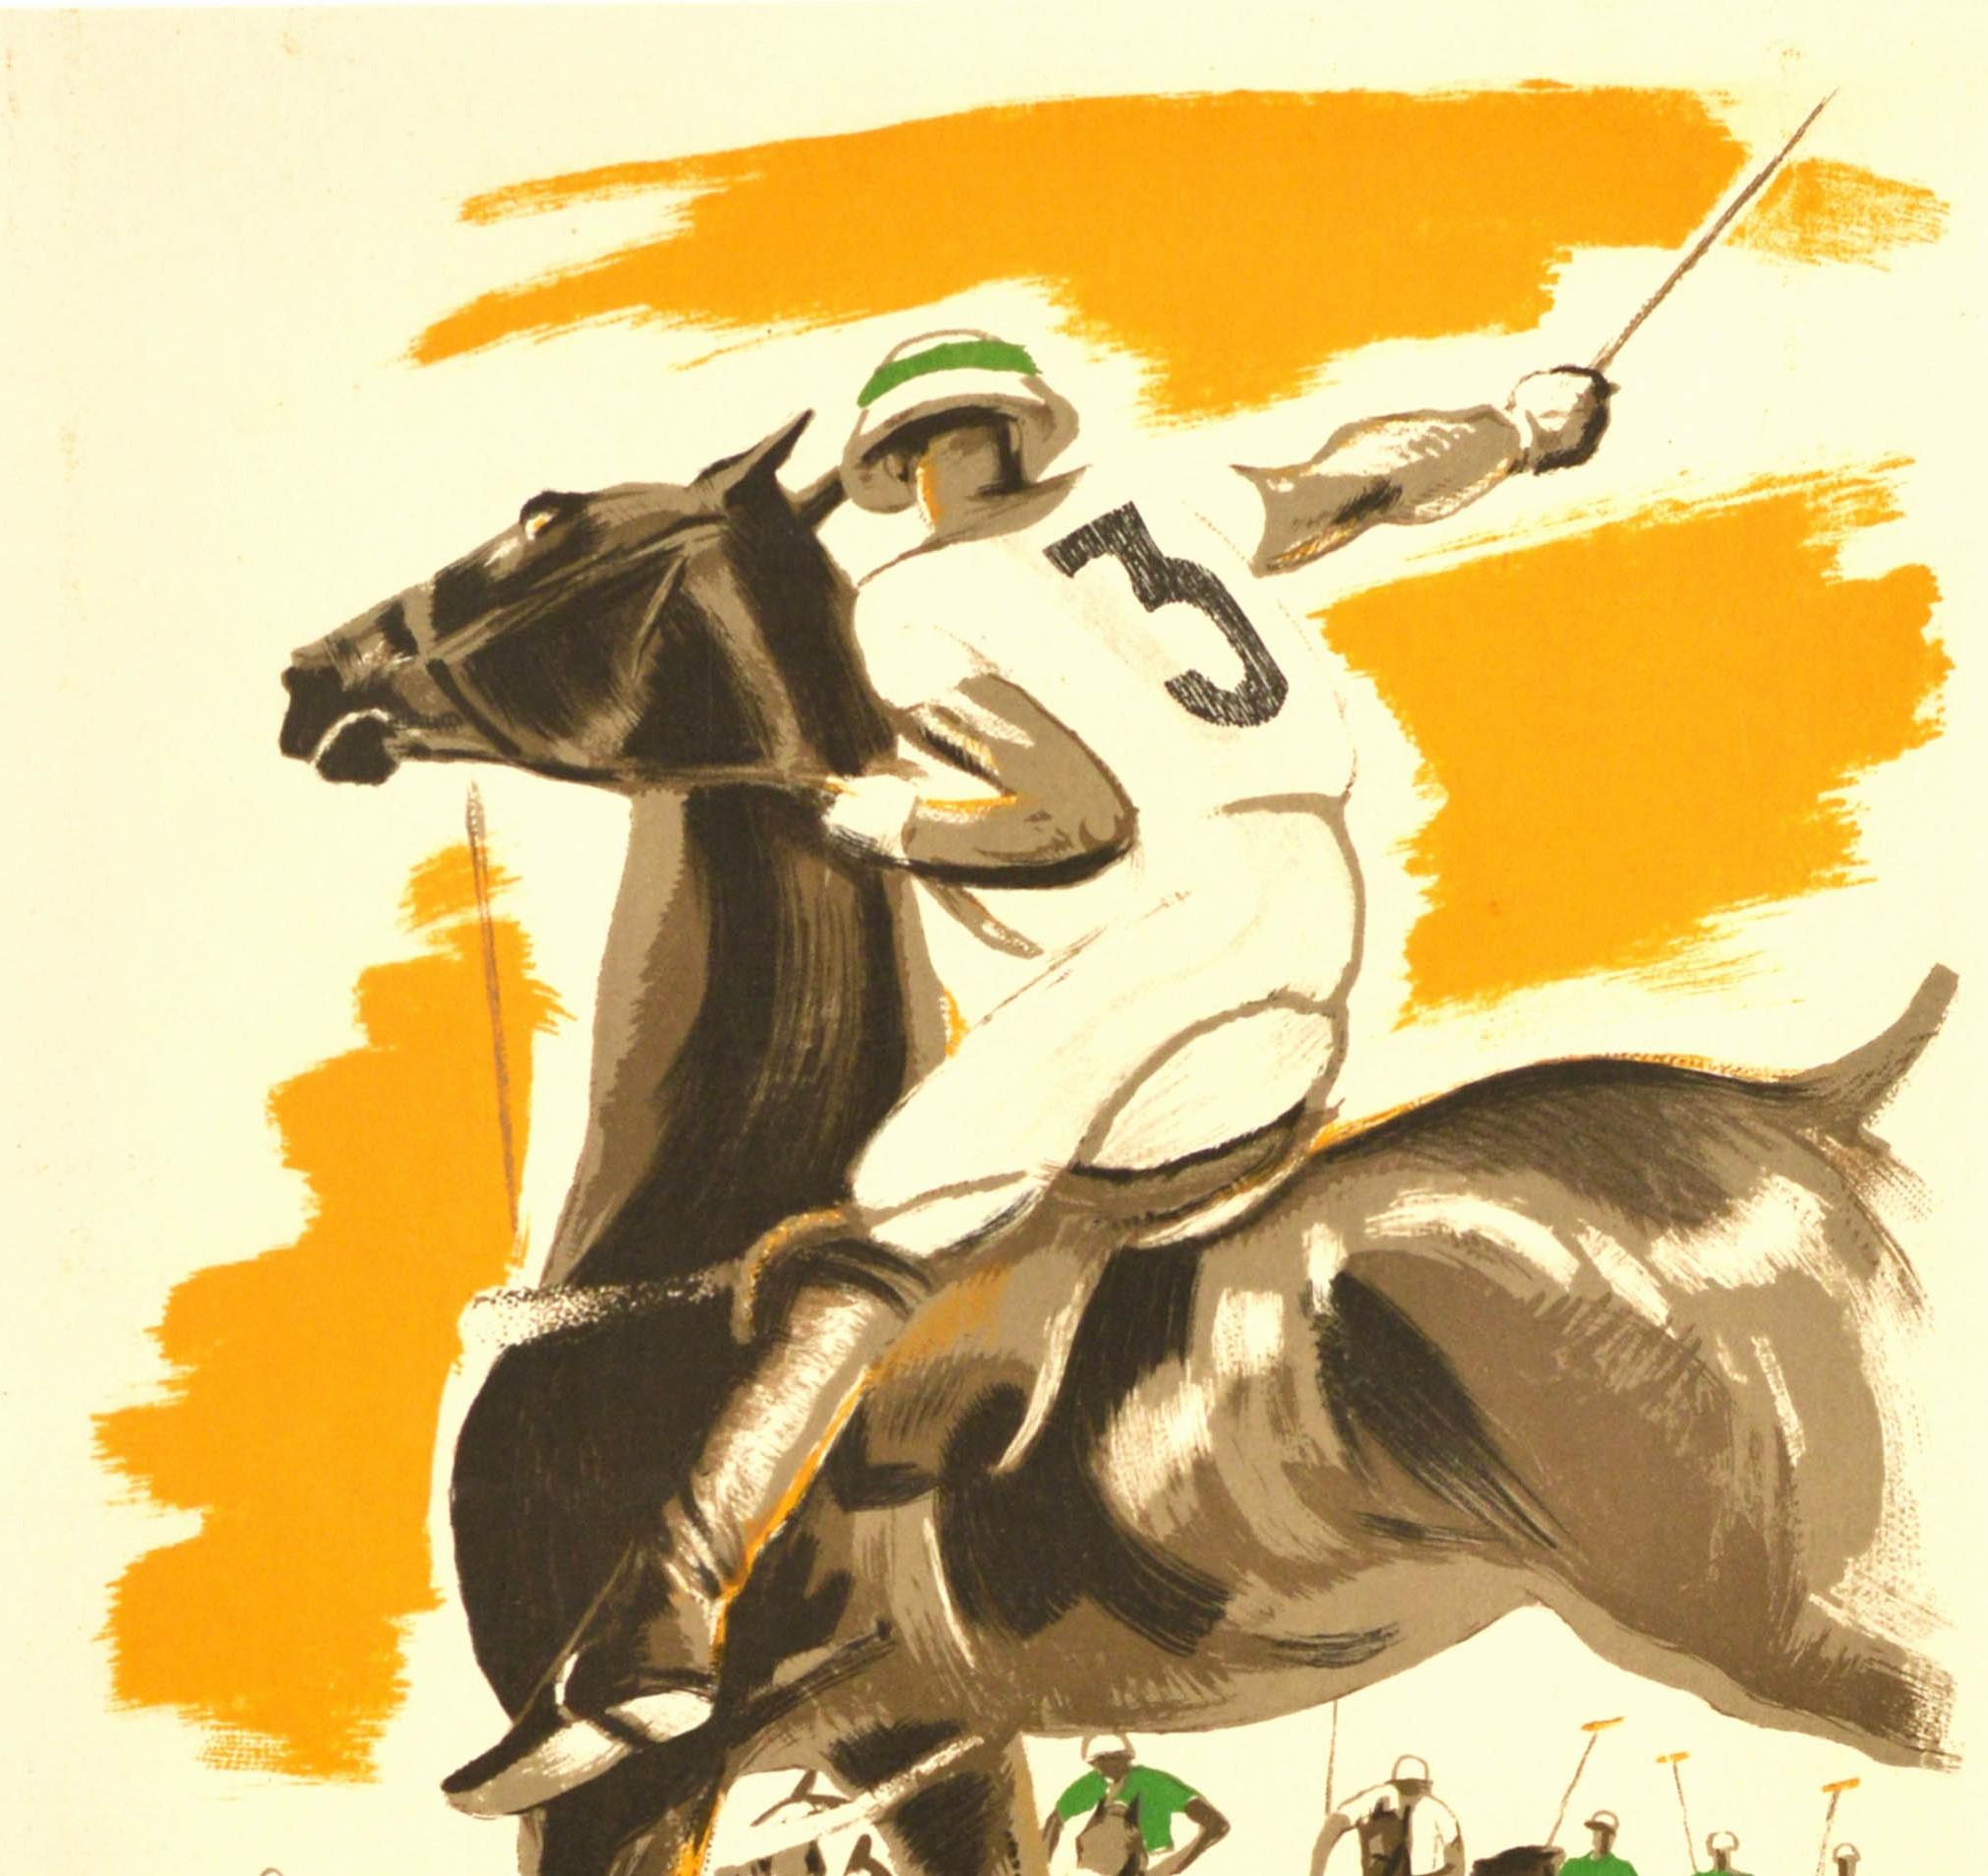 Original vintage sport poster for the annual Deauville Saison De Polo featuring a colorful dynamic image of a polo player wearing a number 3 top and swinging his polo mallet on a horse in the foreground with other players on the grass below the